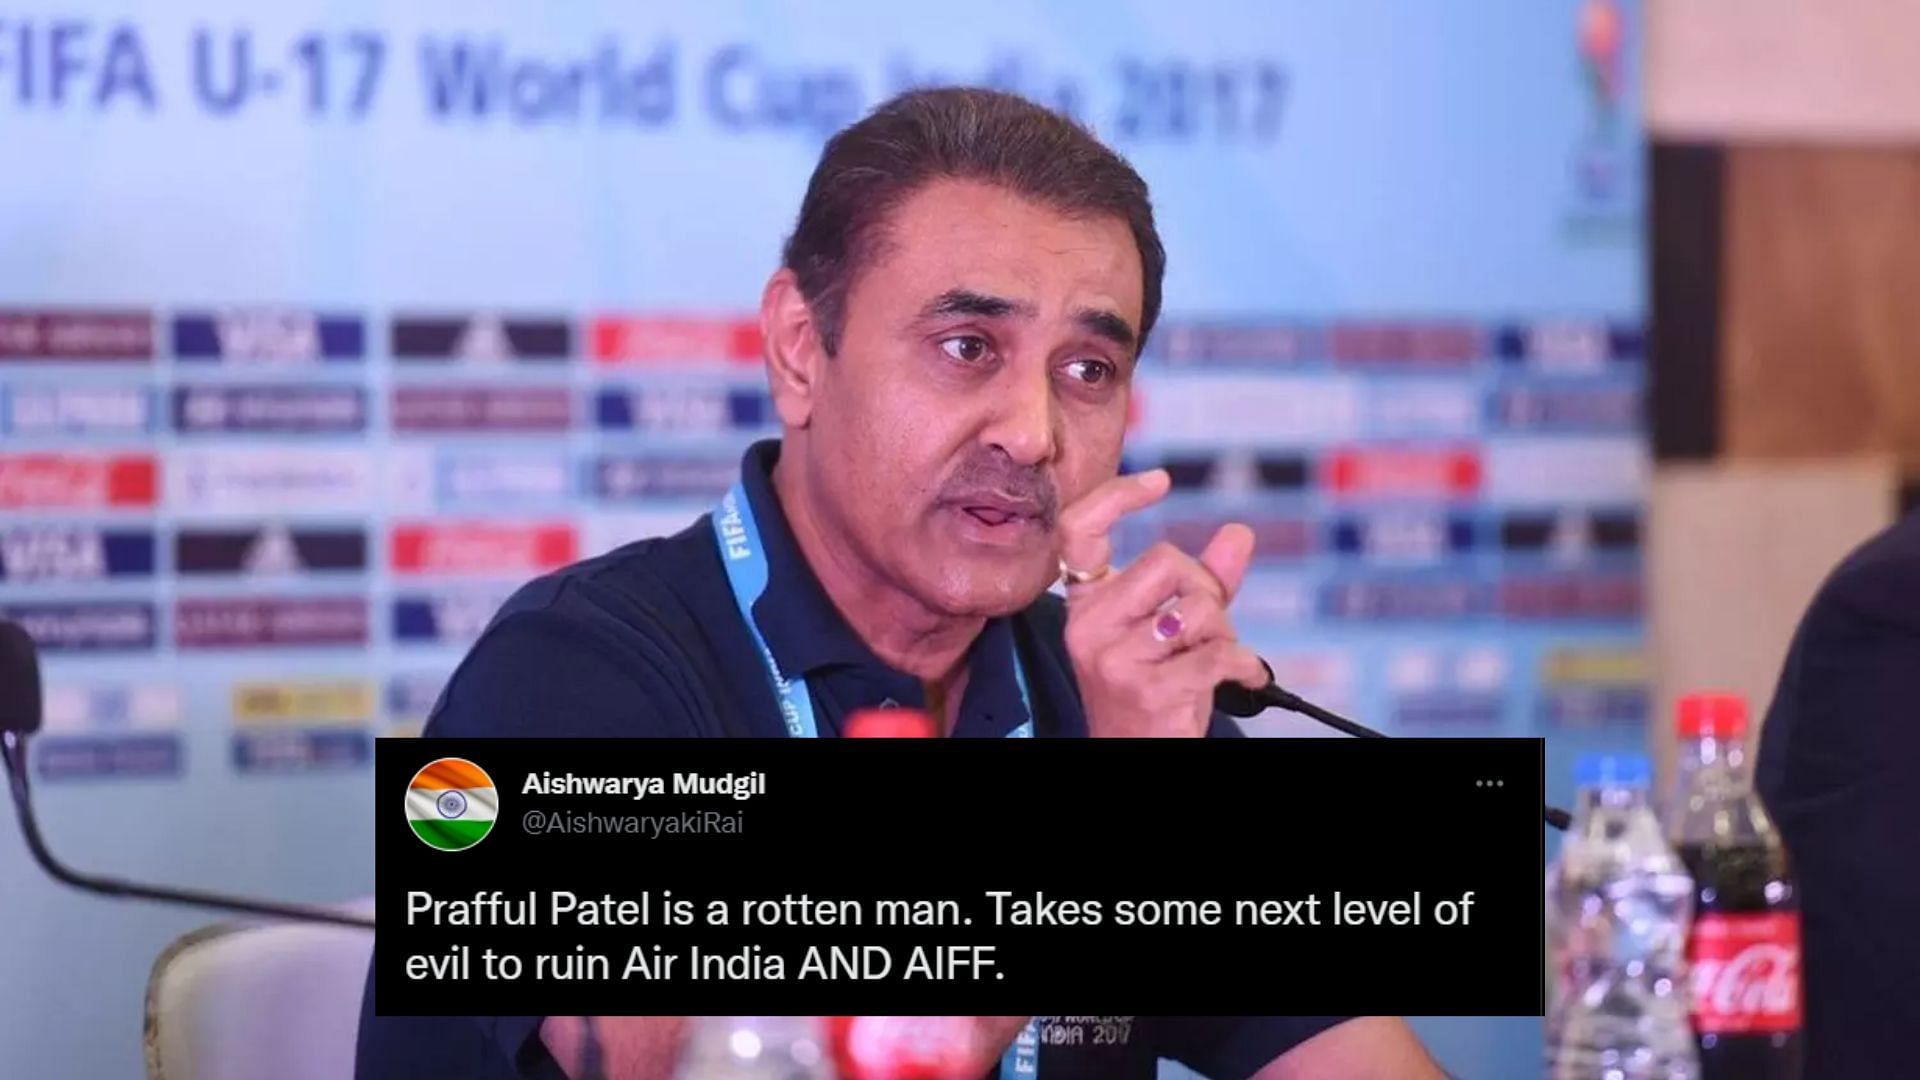 Praful Patel has been blamed by Indian football fans for the prevailing FIFA ban.